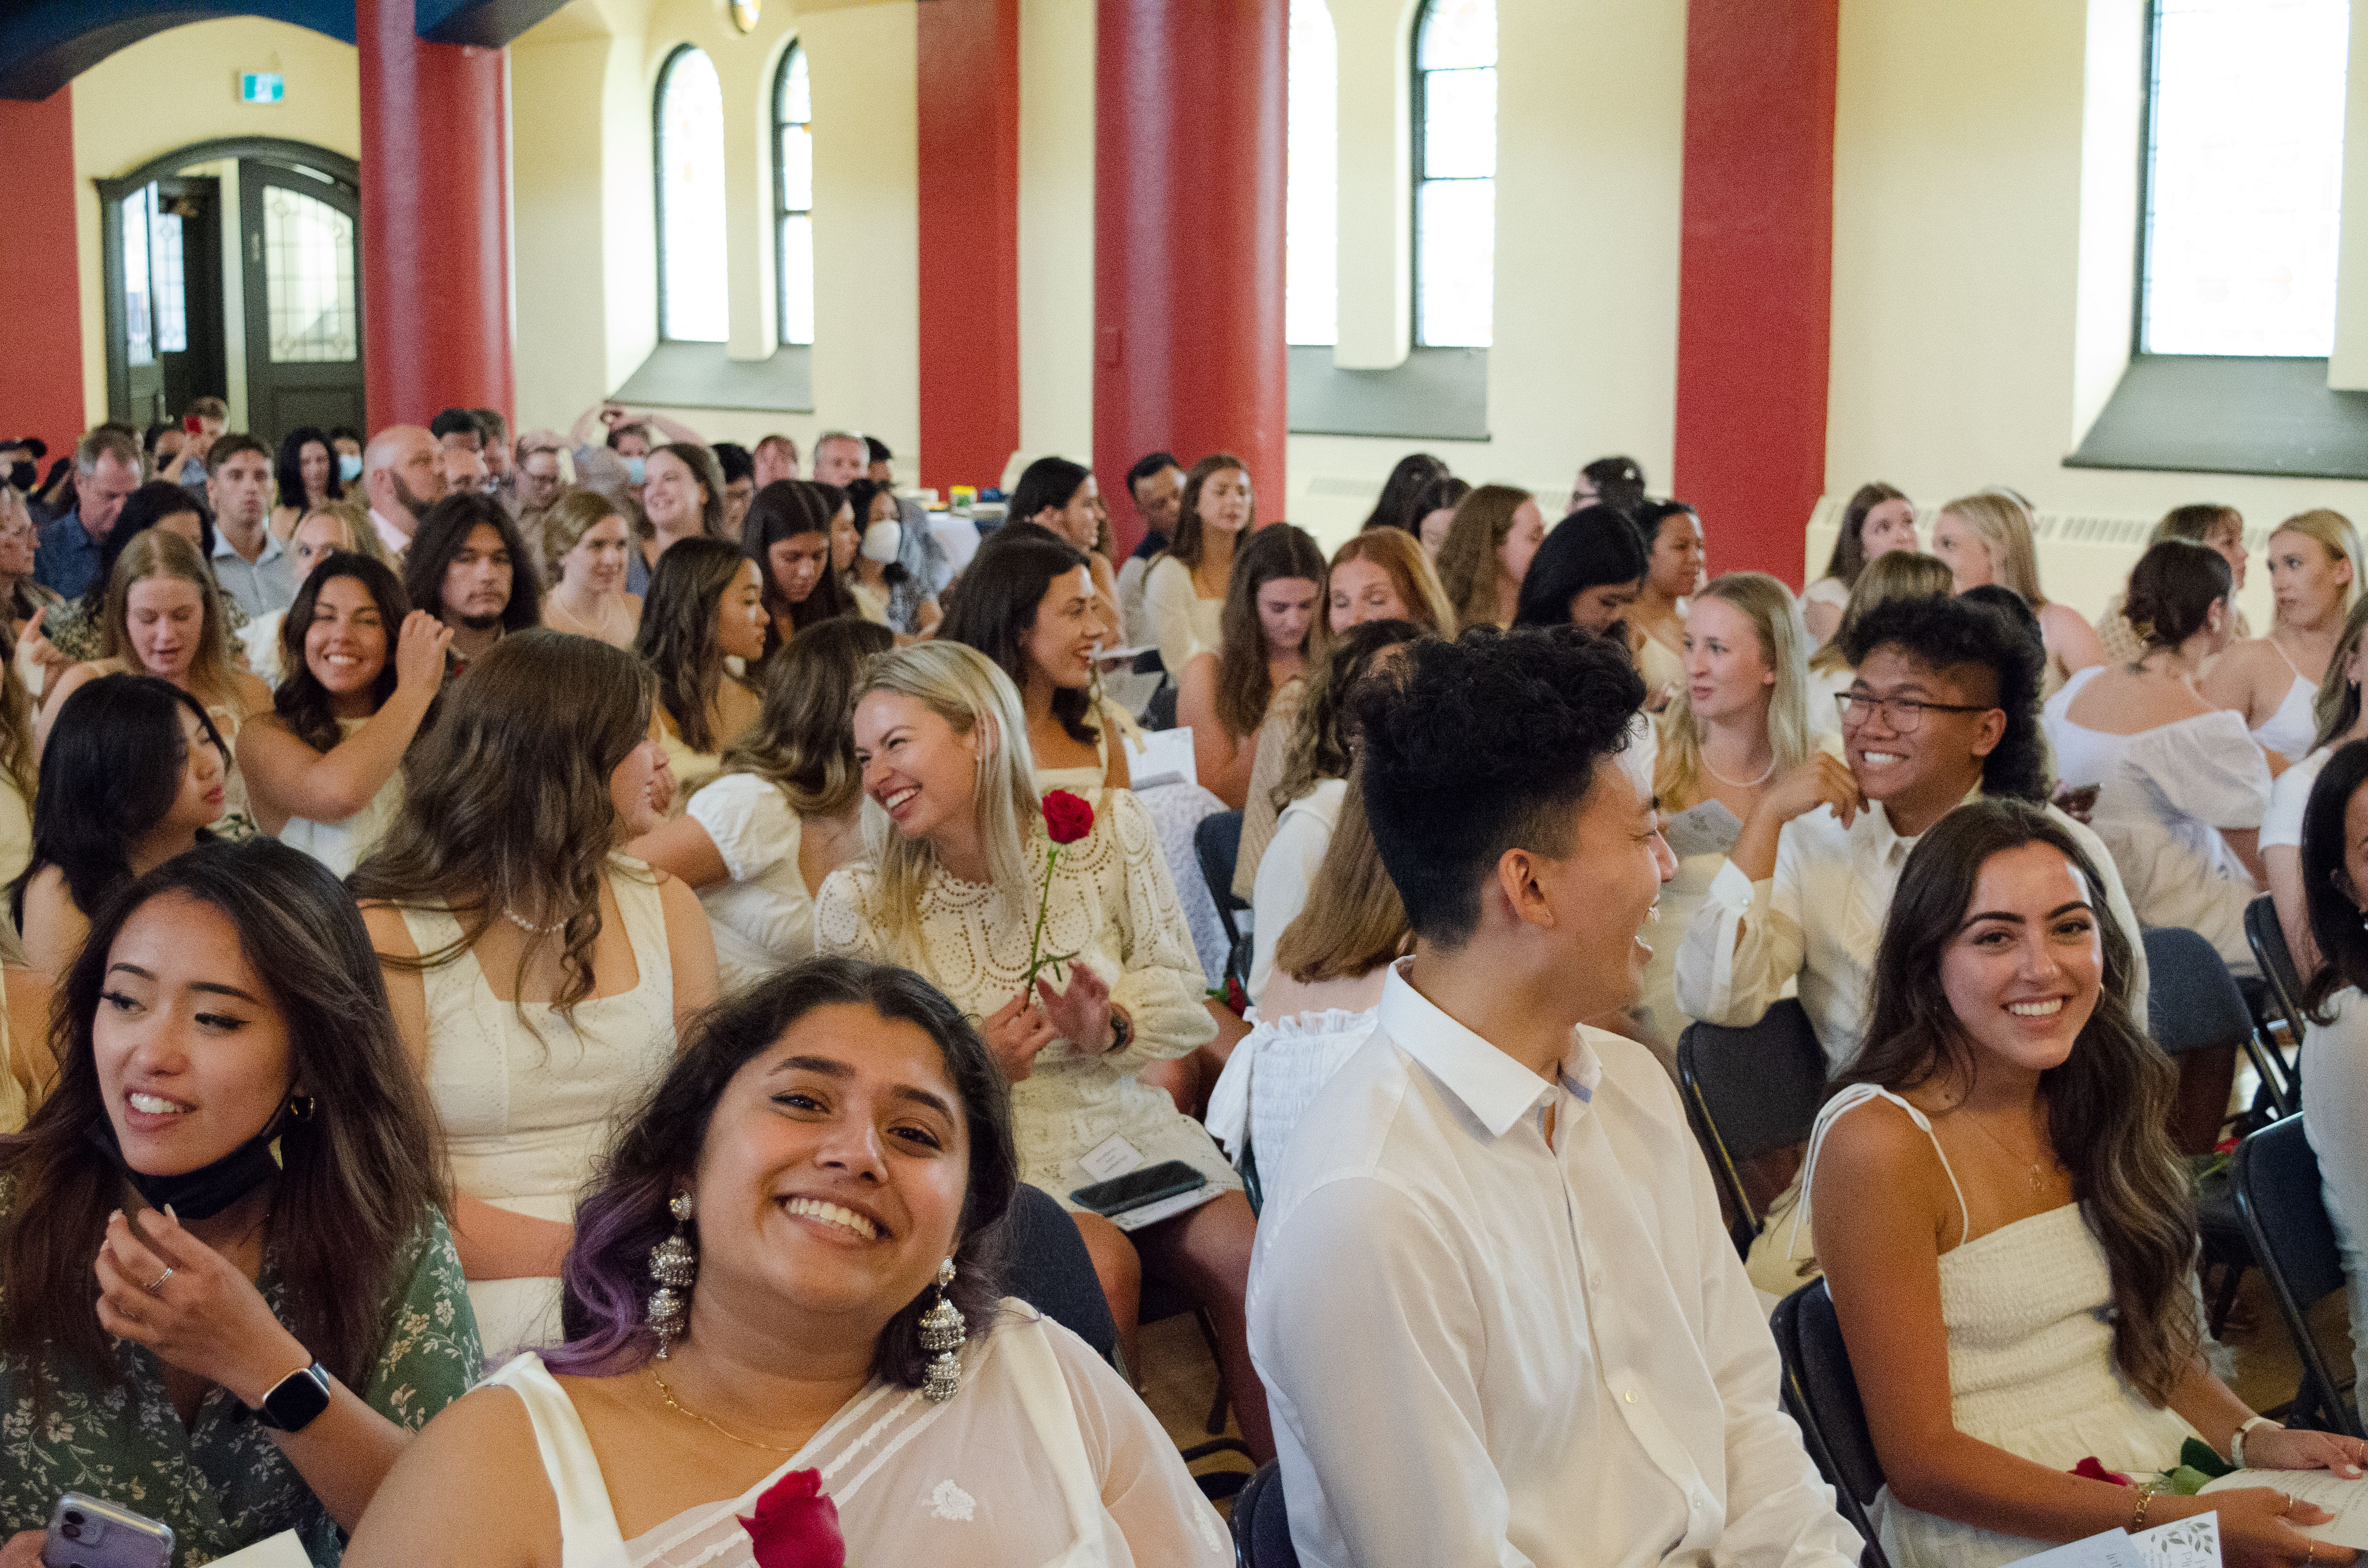 group photo of class of 2022 nursing students smiling at their pinning ceremony